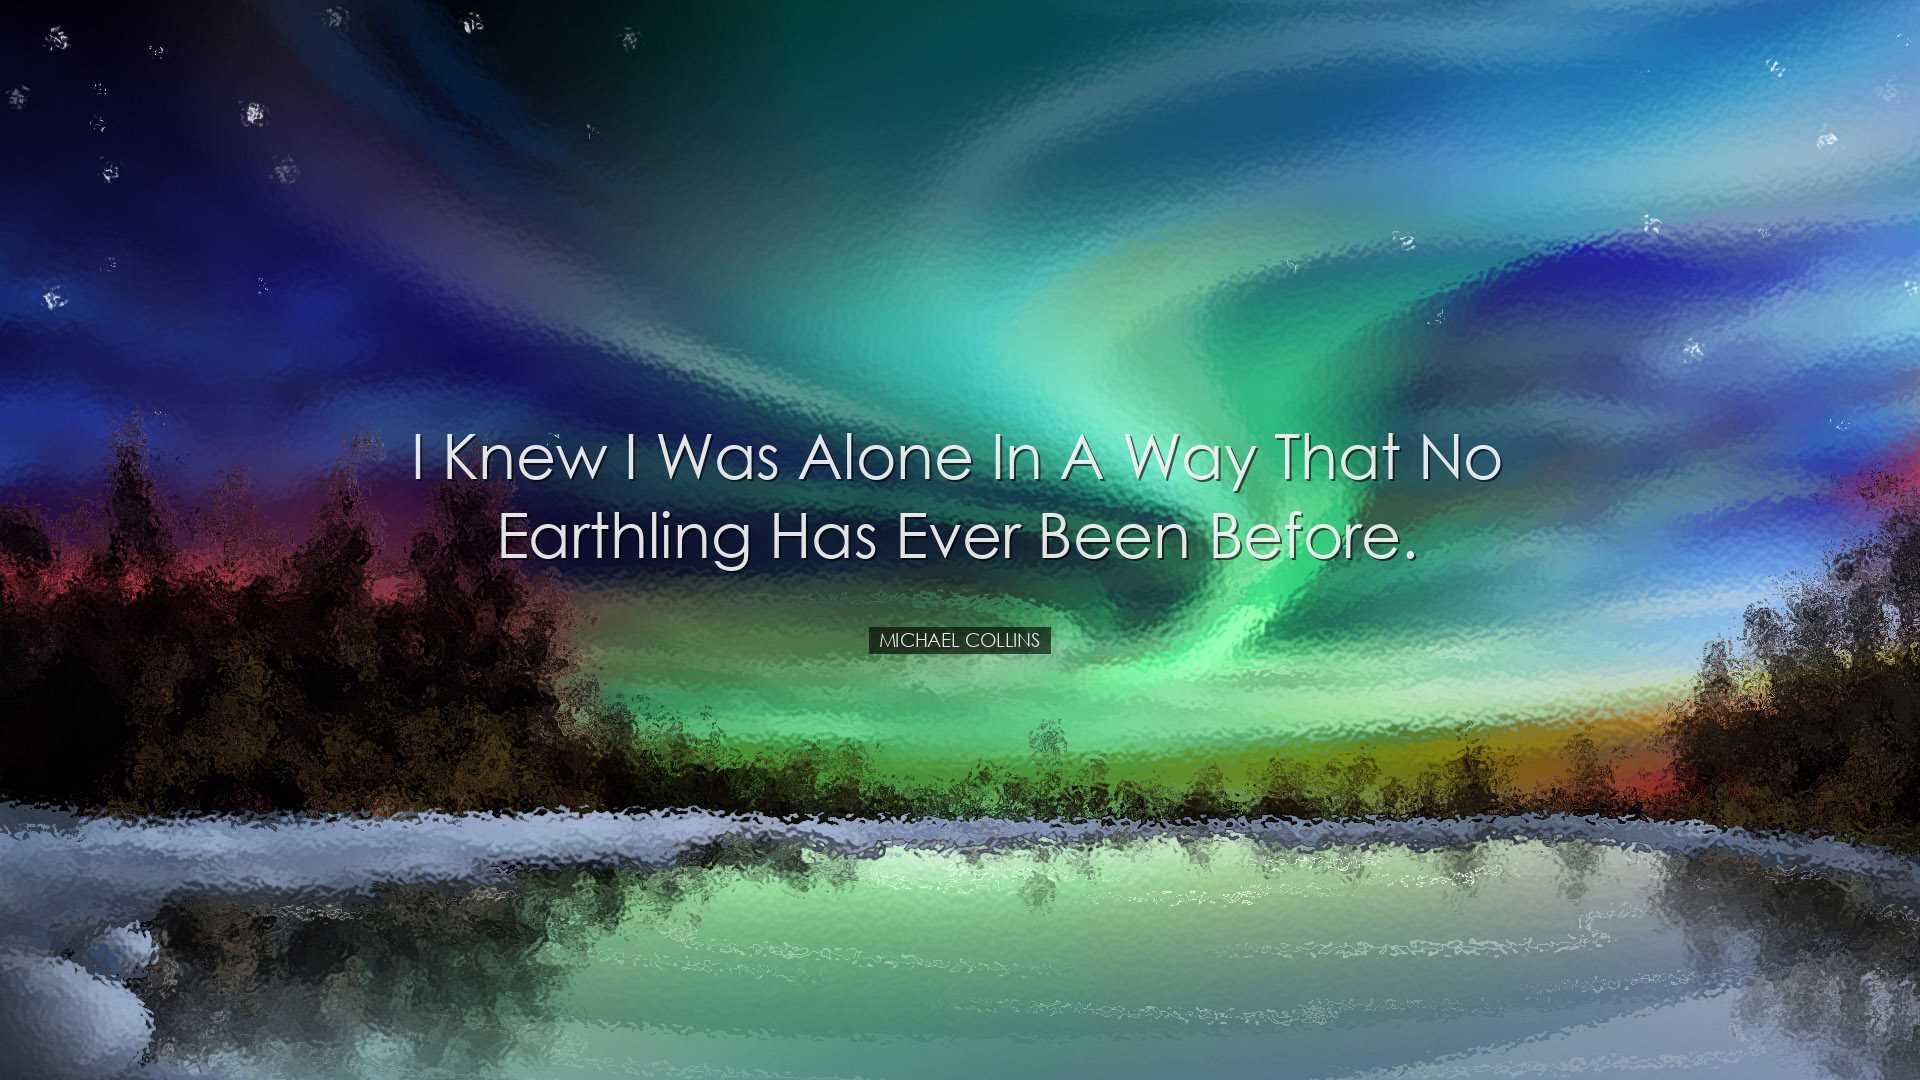 I knew I was alone in a way that no earthling has ever been before